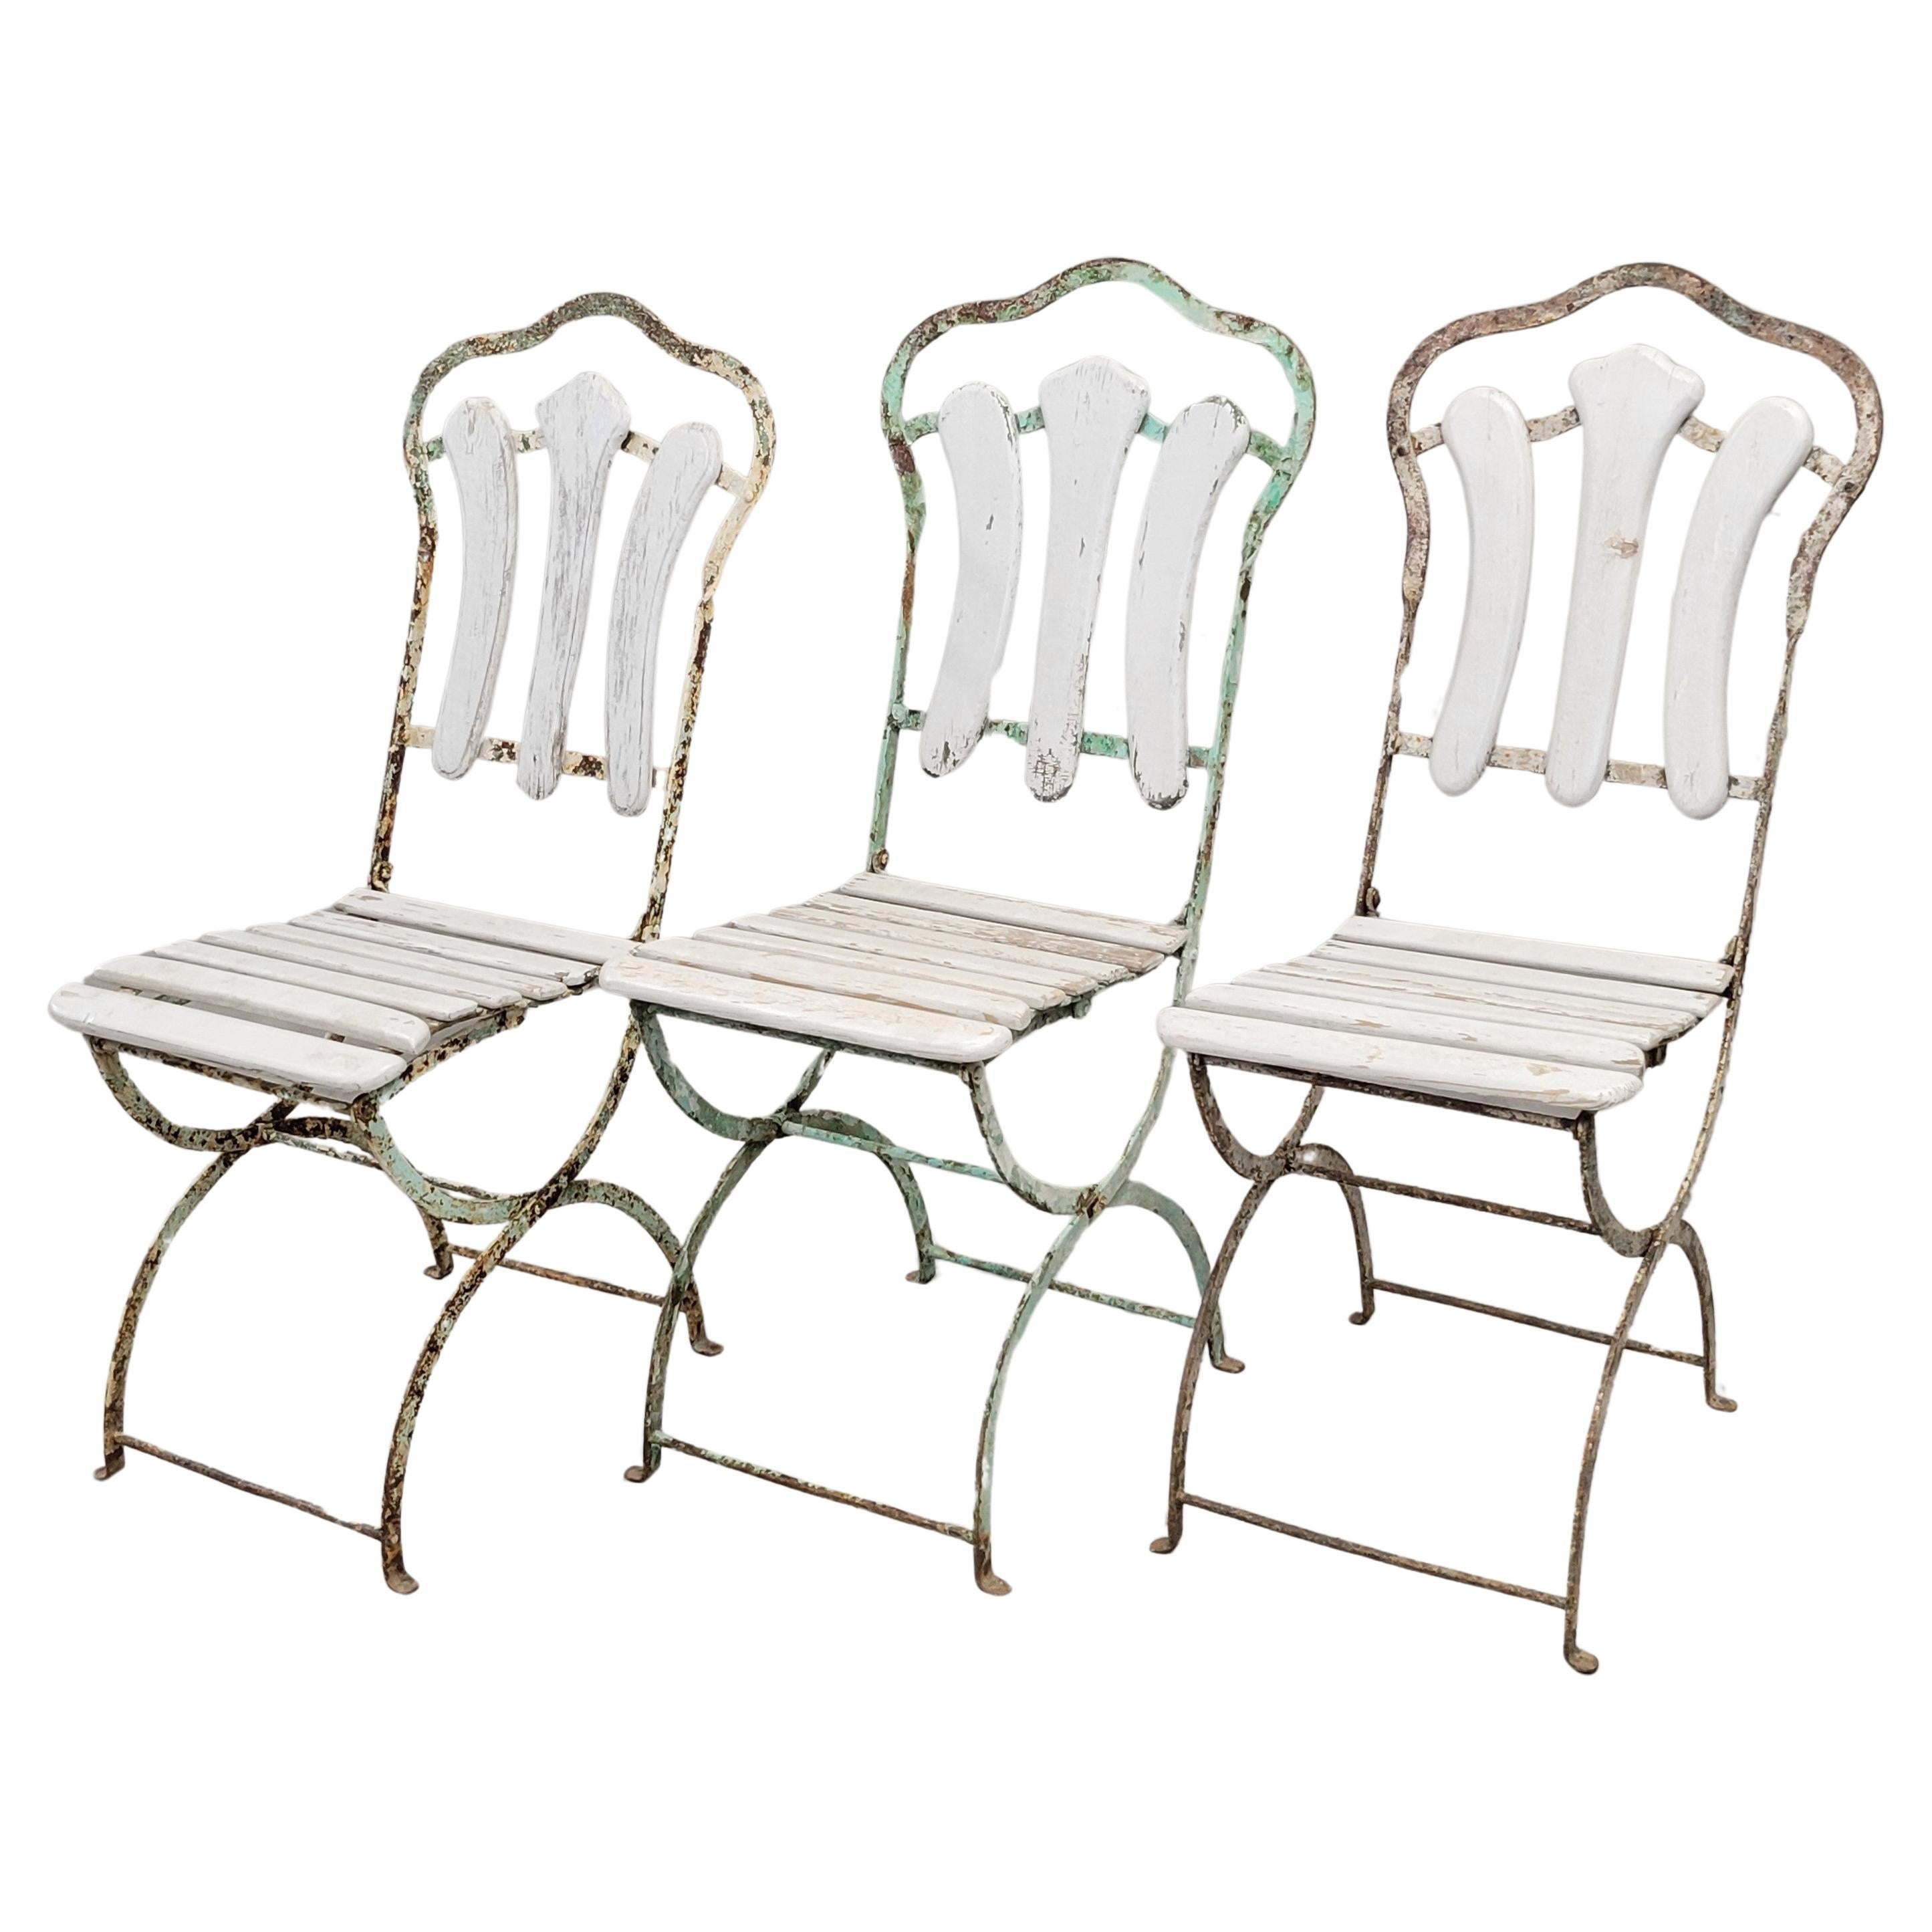 Antique French Iron and Wood Folding Bistro Garden Chairs - Set of 3 For Sale